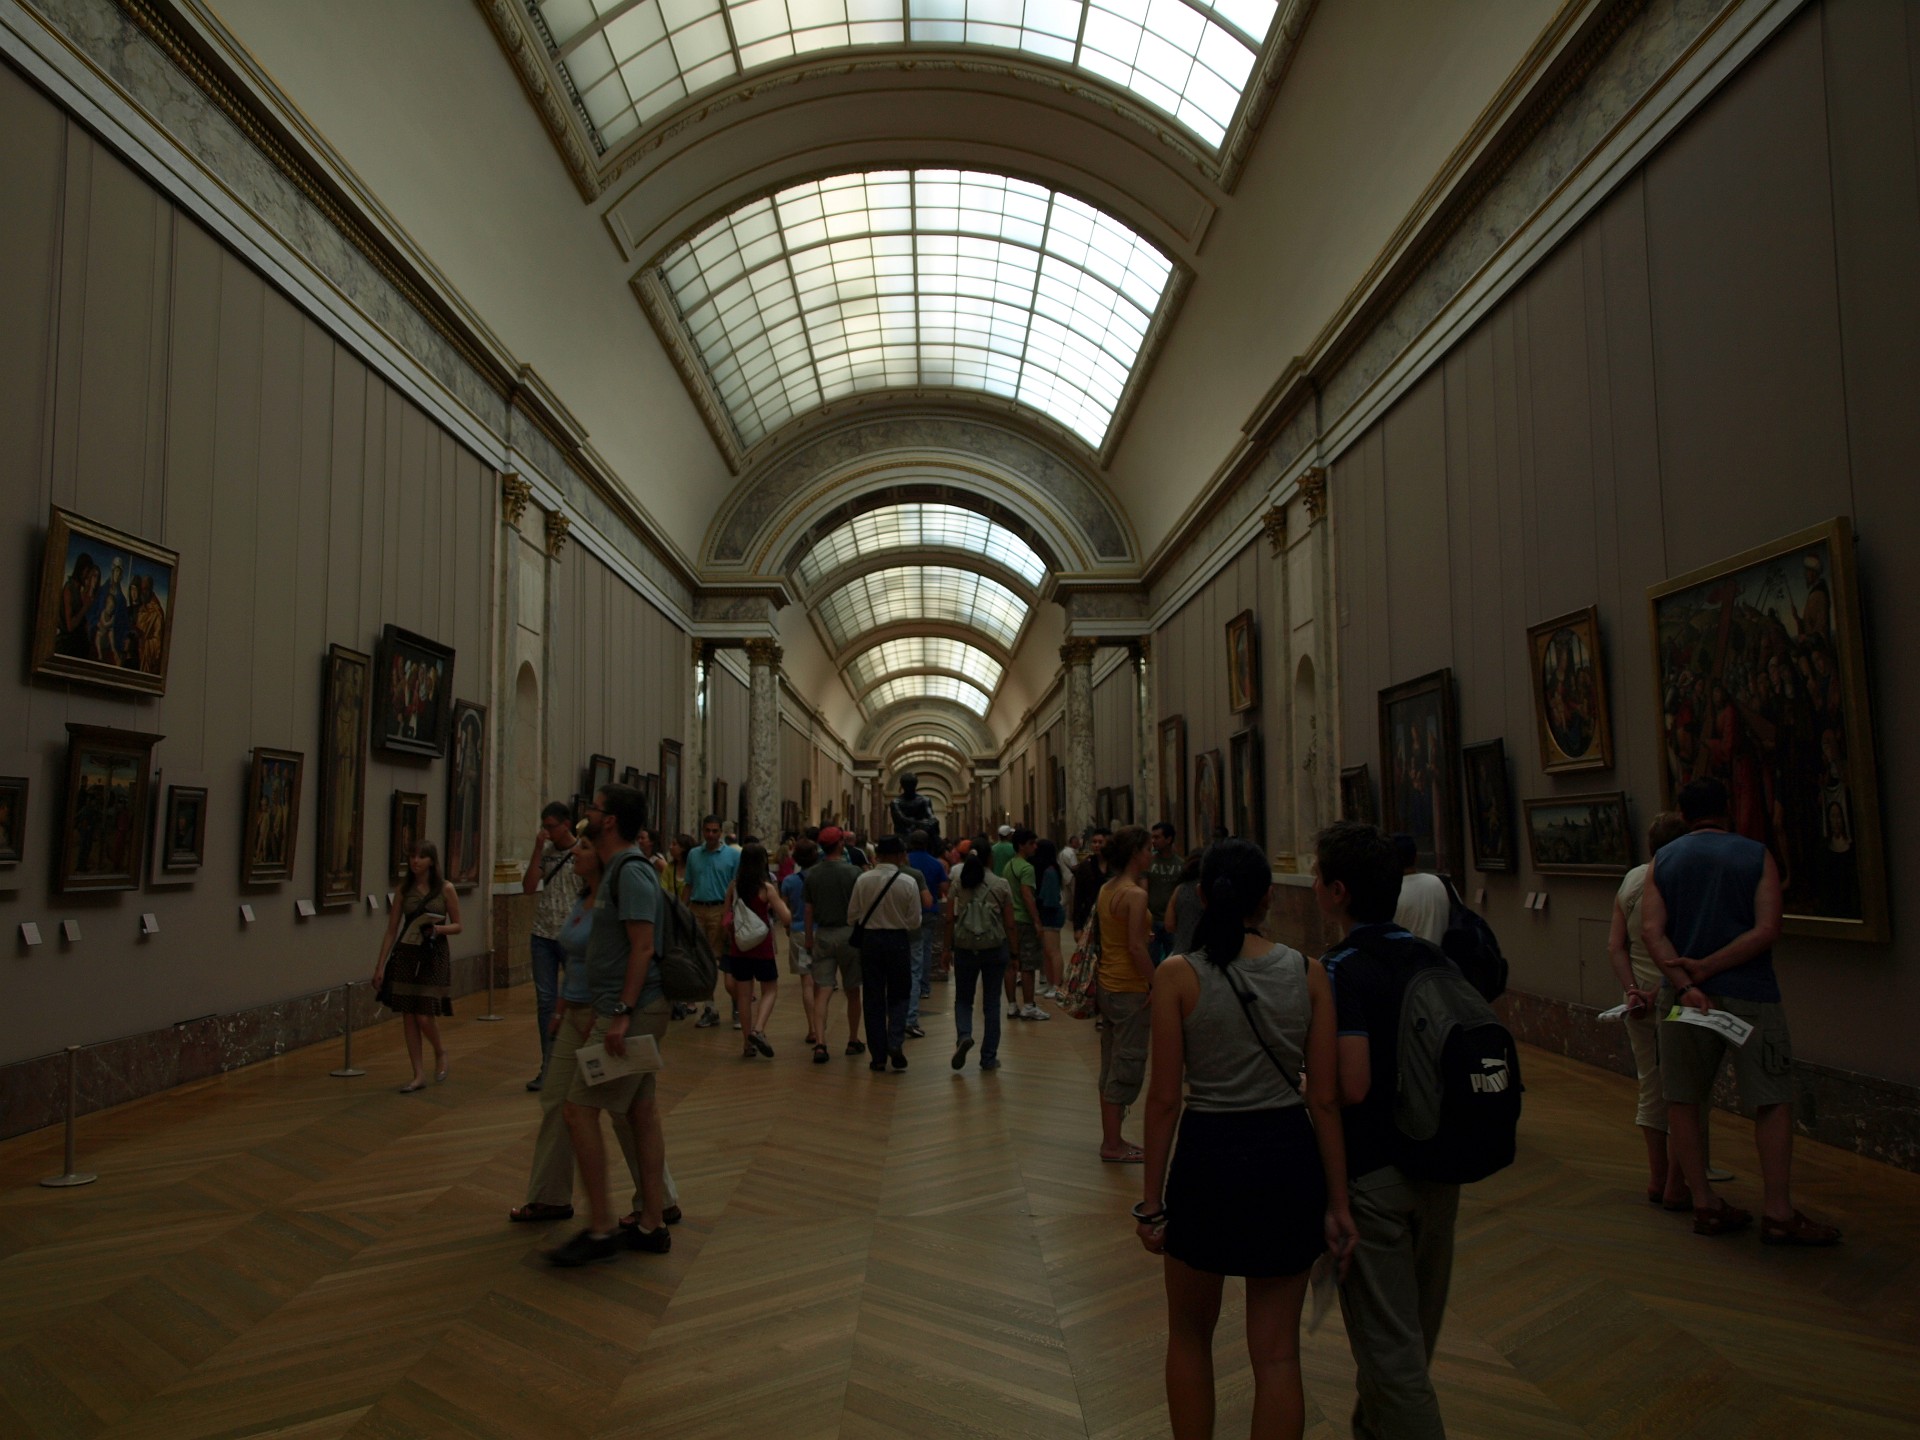 Crowds Rushing to See the Mona Lisa